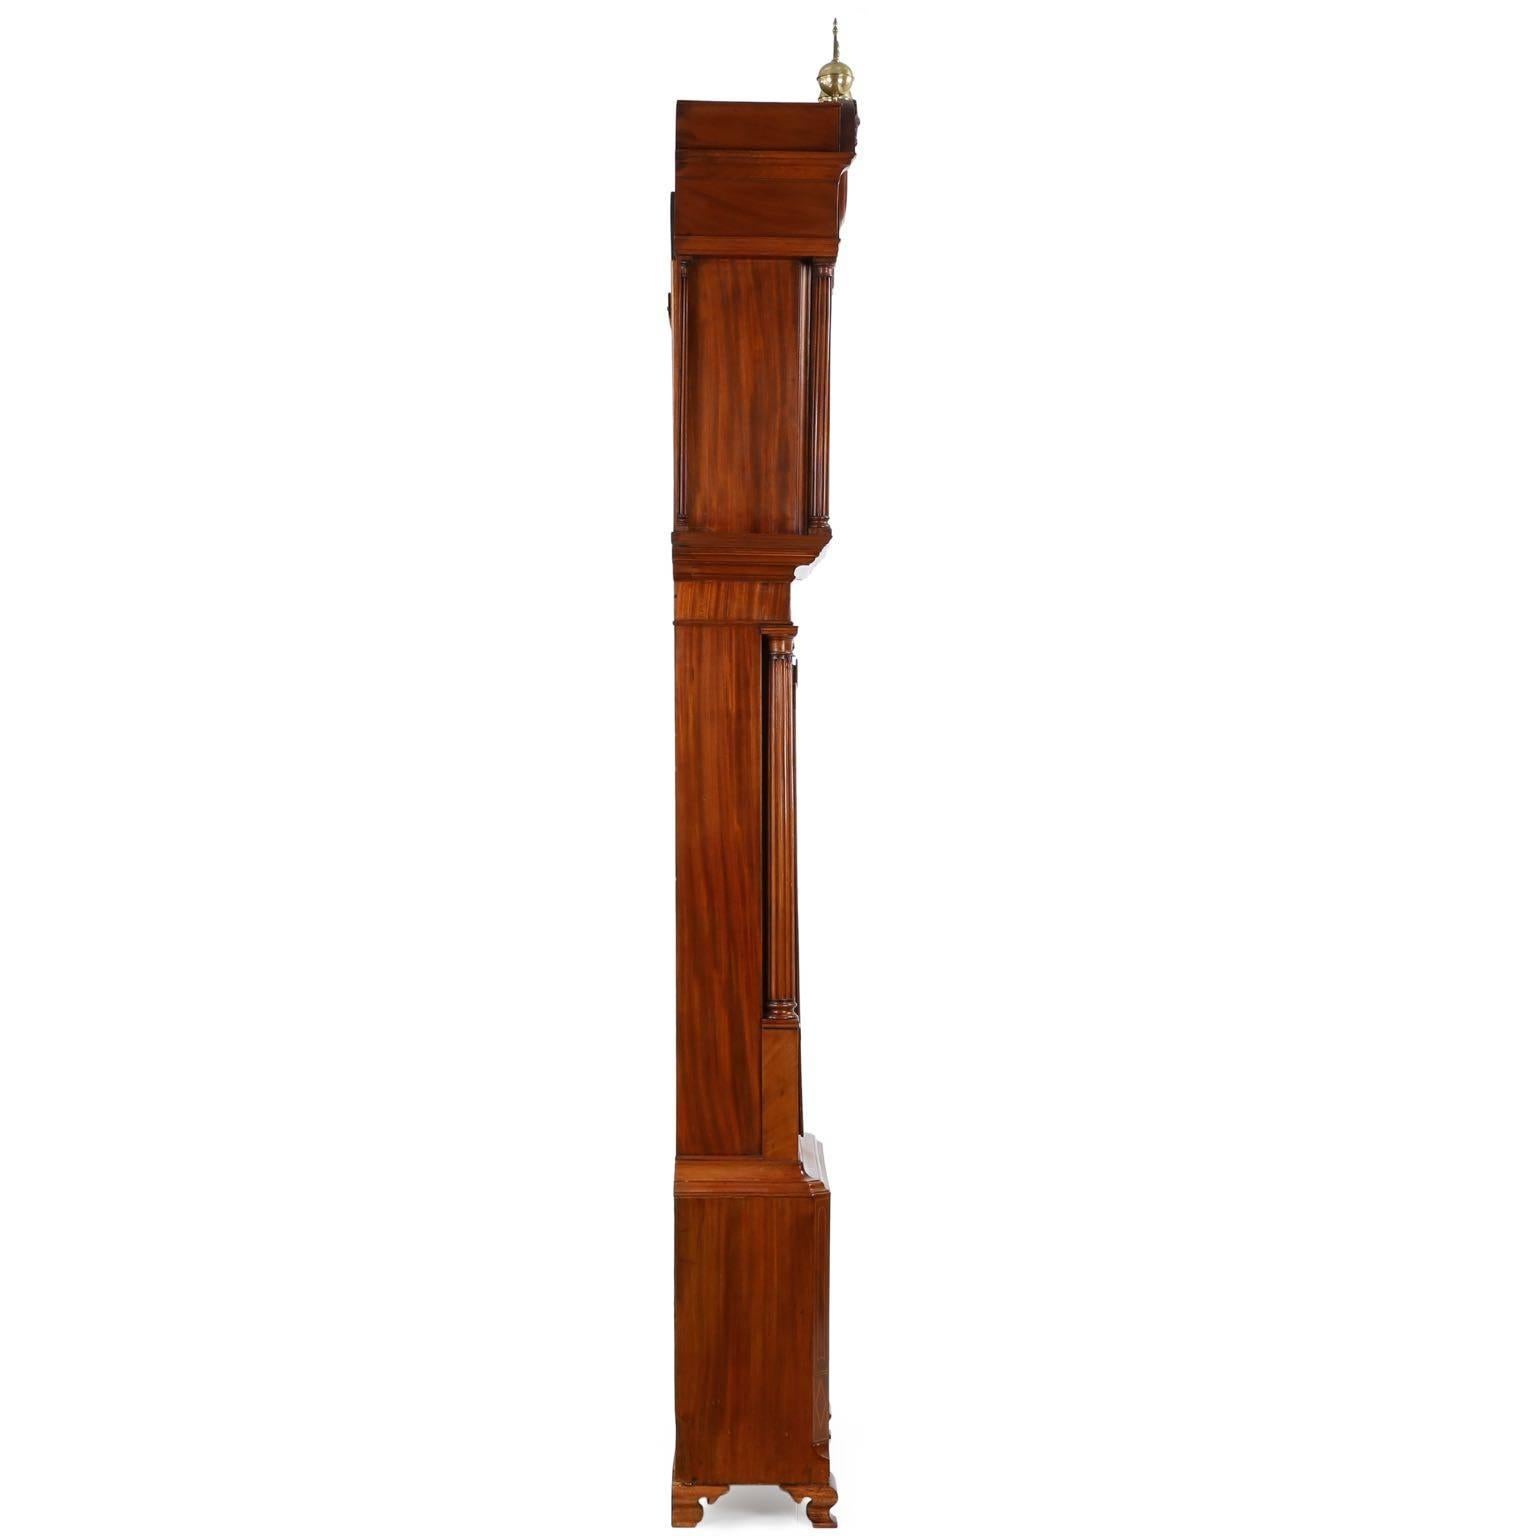 Great Britain (UK) English Georgian Mahogany Antique Tall Case Clock Tribute to Admiral Nelson